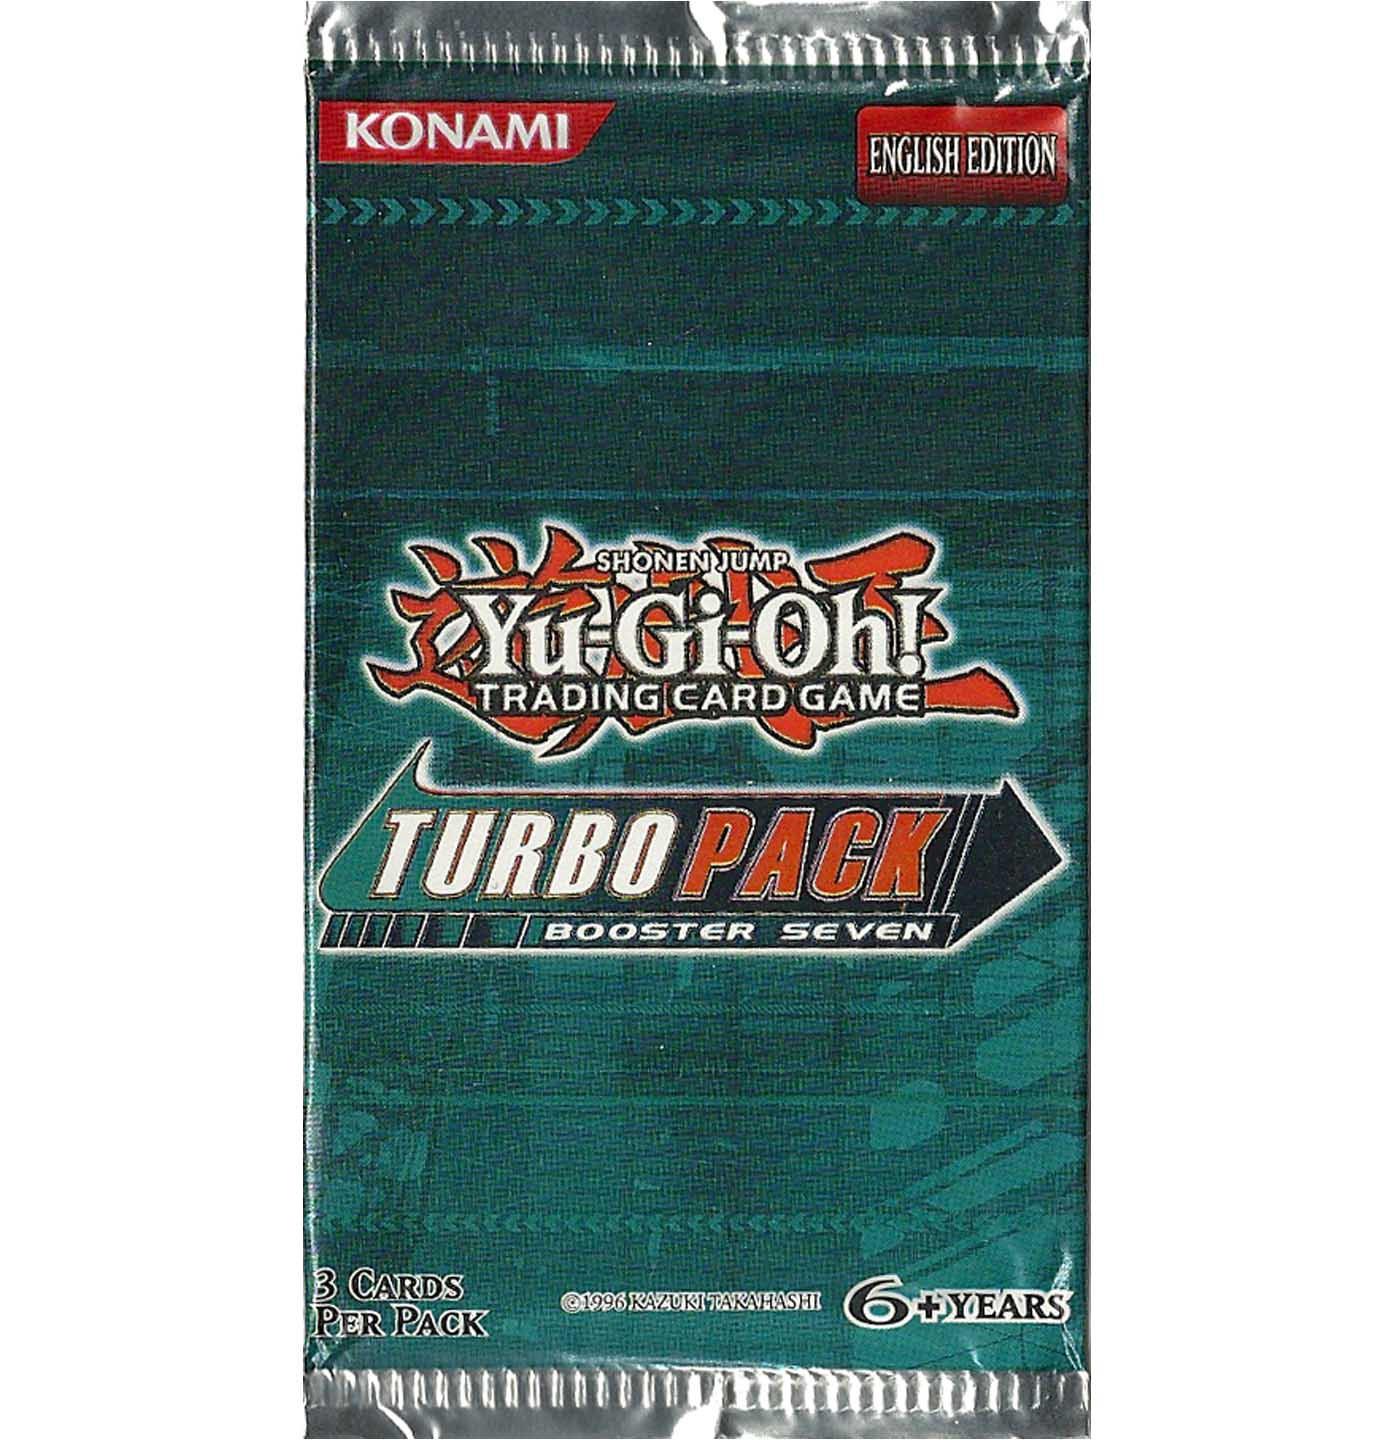 Yu-Gi-Oh!  Turbo Pack Booster Seven Booster 